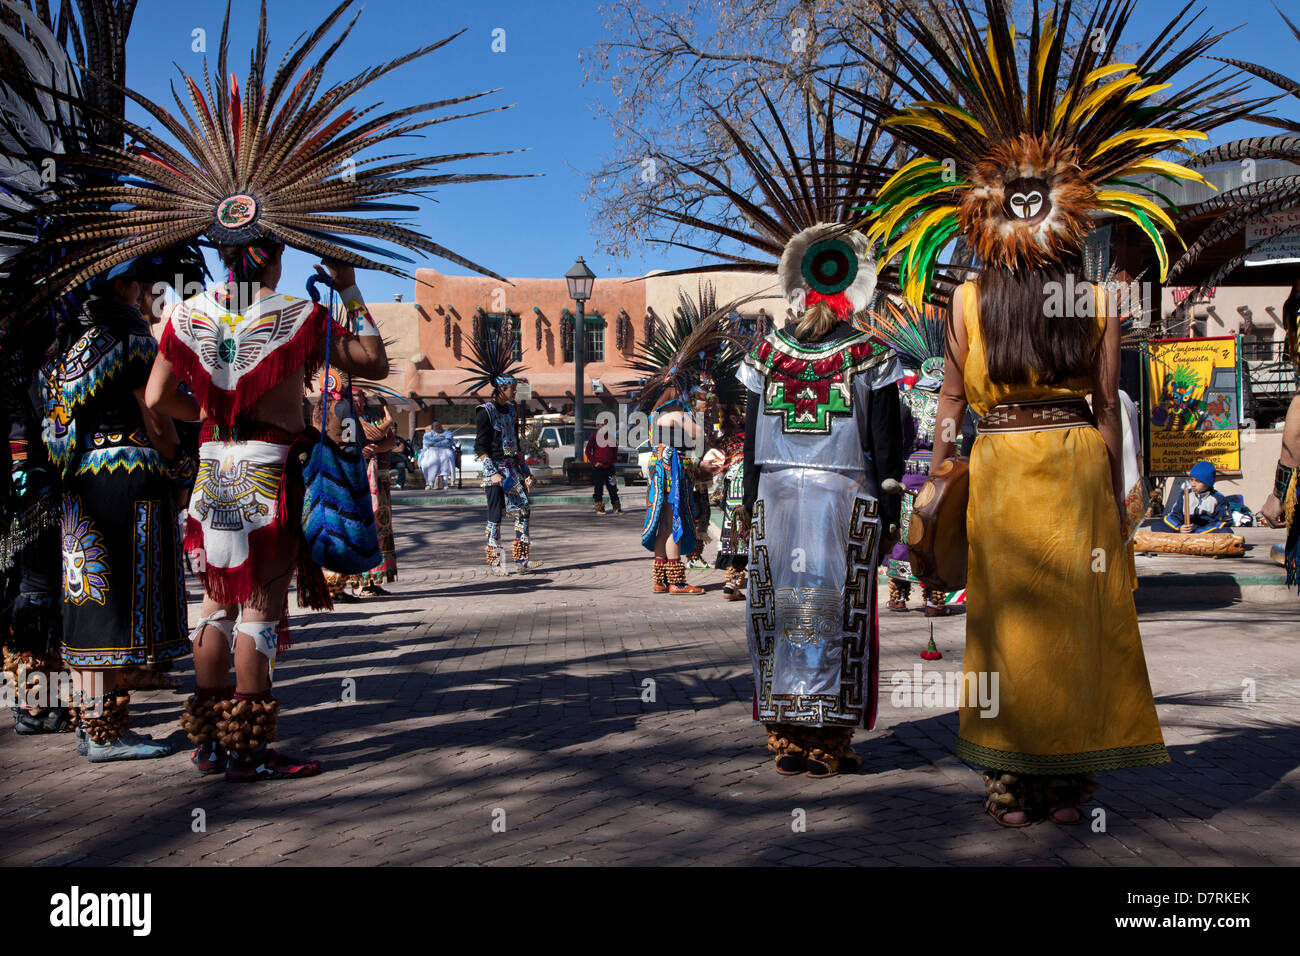 A dance performance by the Danza Azteca de Anahuac on the Dia de Cuautemoc on the Plaza in Taos, New Mexico. Stock Photo